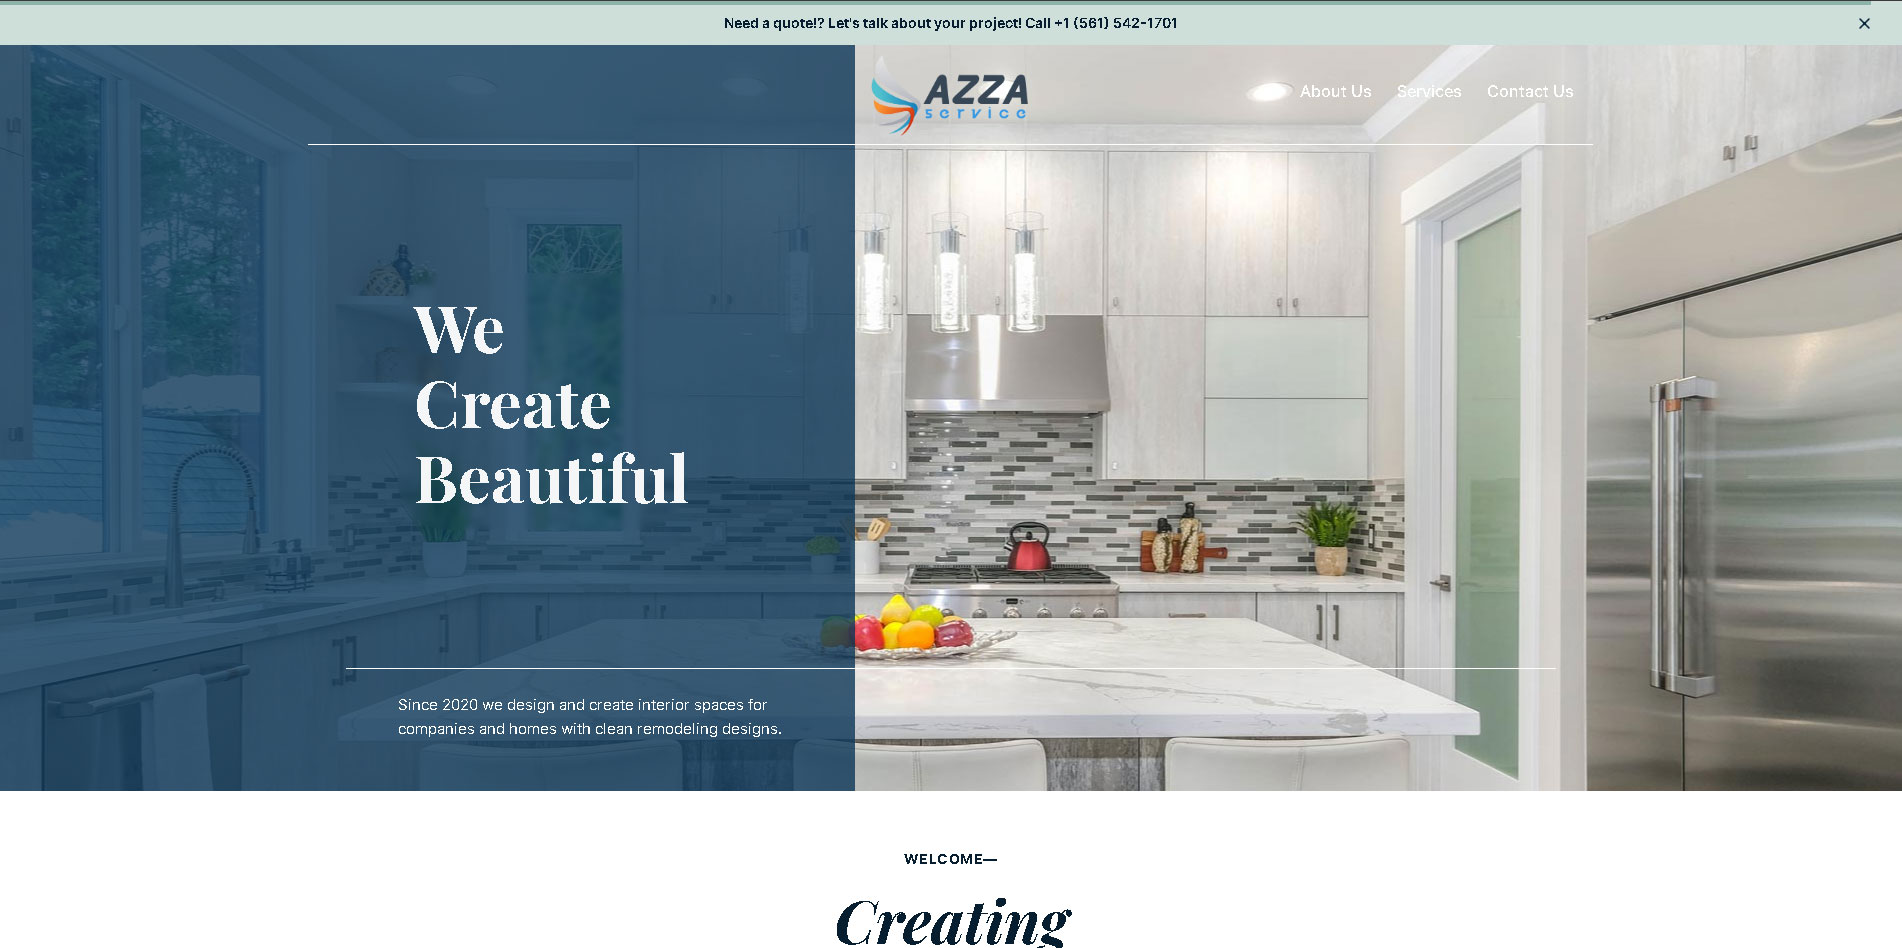 azza remodeling website